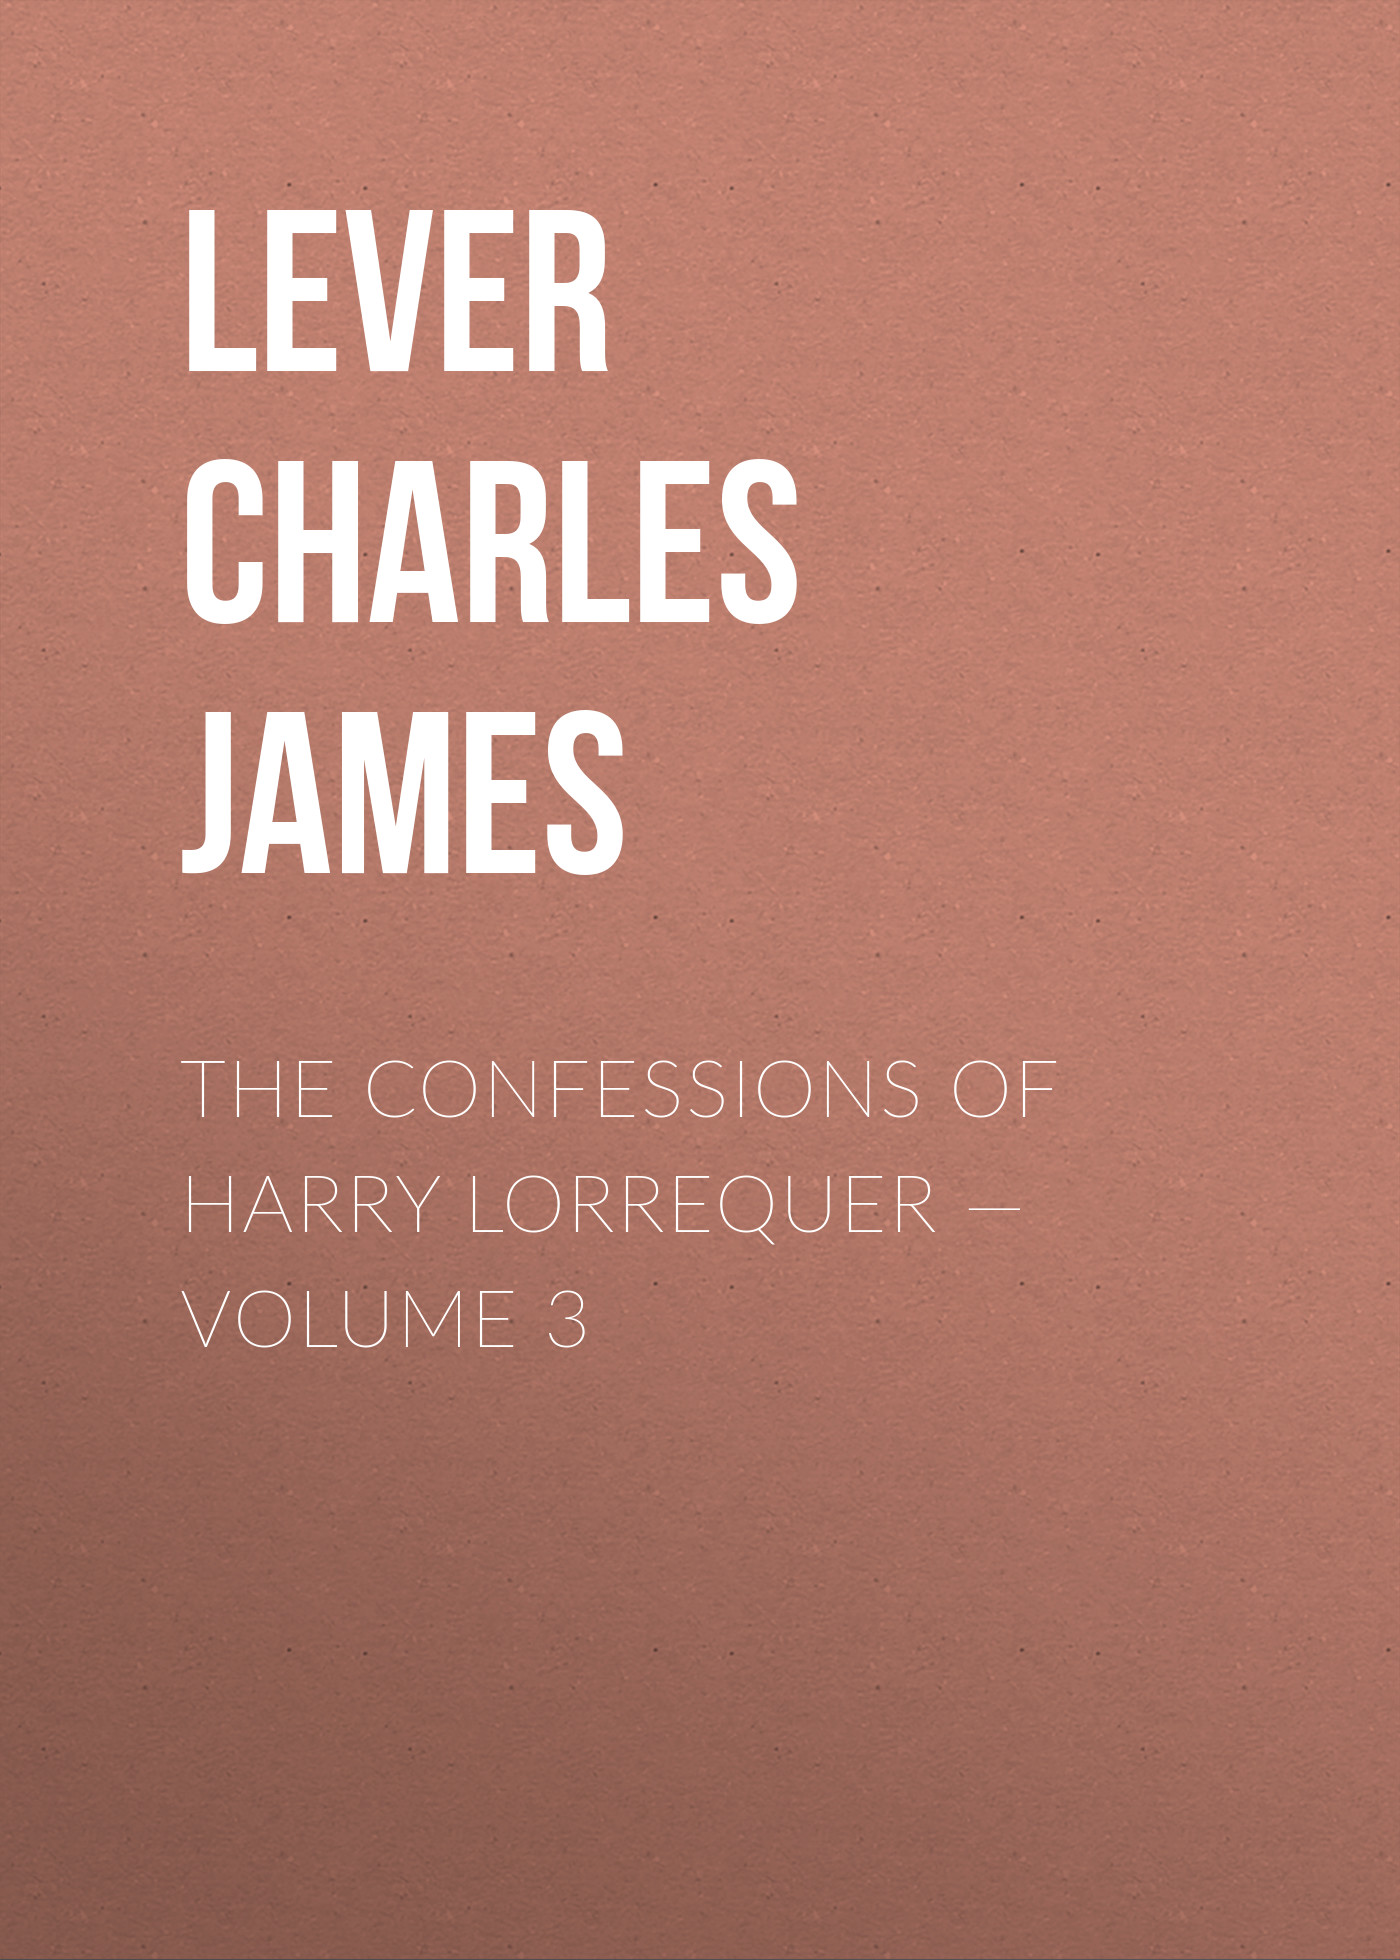 The Confessions of Harry Lorrequer— Volume 3